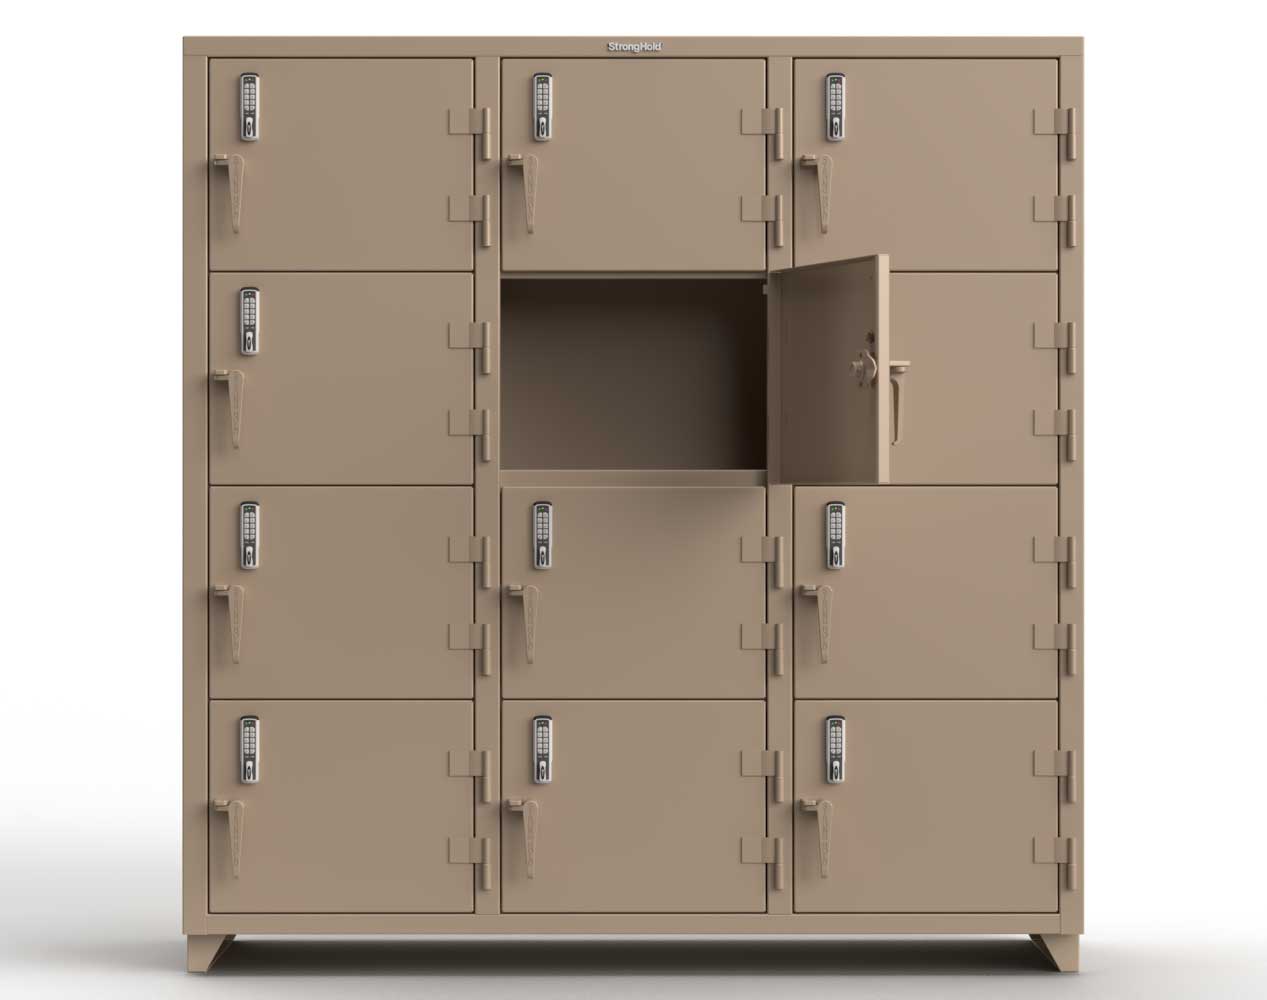 Extra Heavy Duty 14 GA 4-Tier Locker with Keyless Entry Lock, 12 Compartments – 72 in. W x 24 in. D x 75 in. H